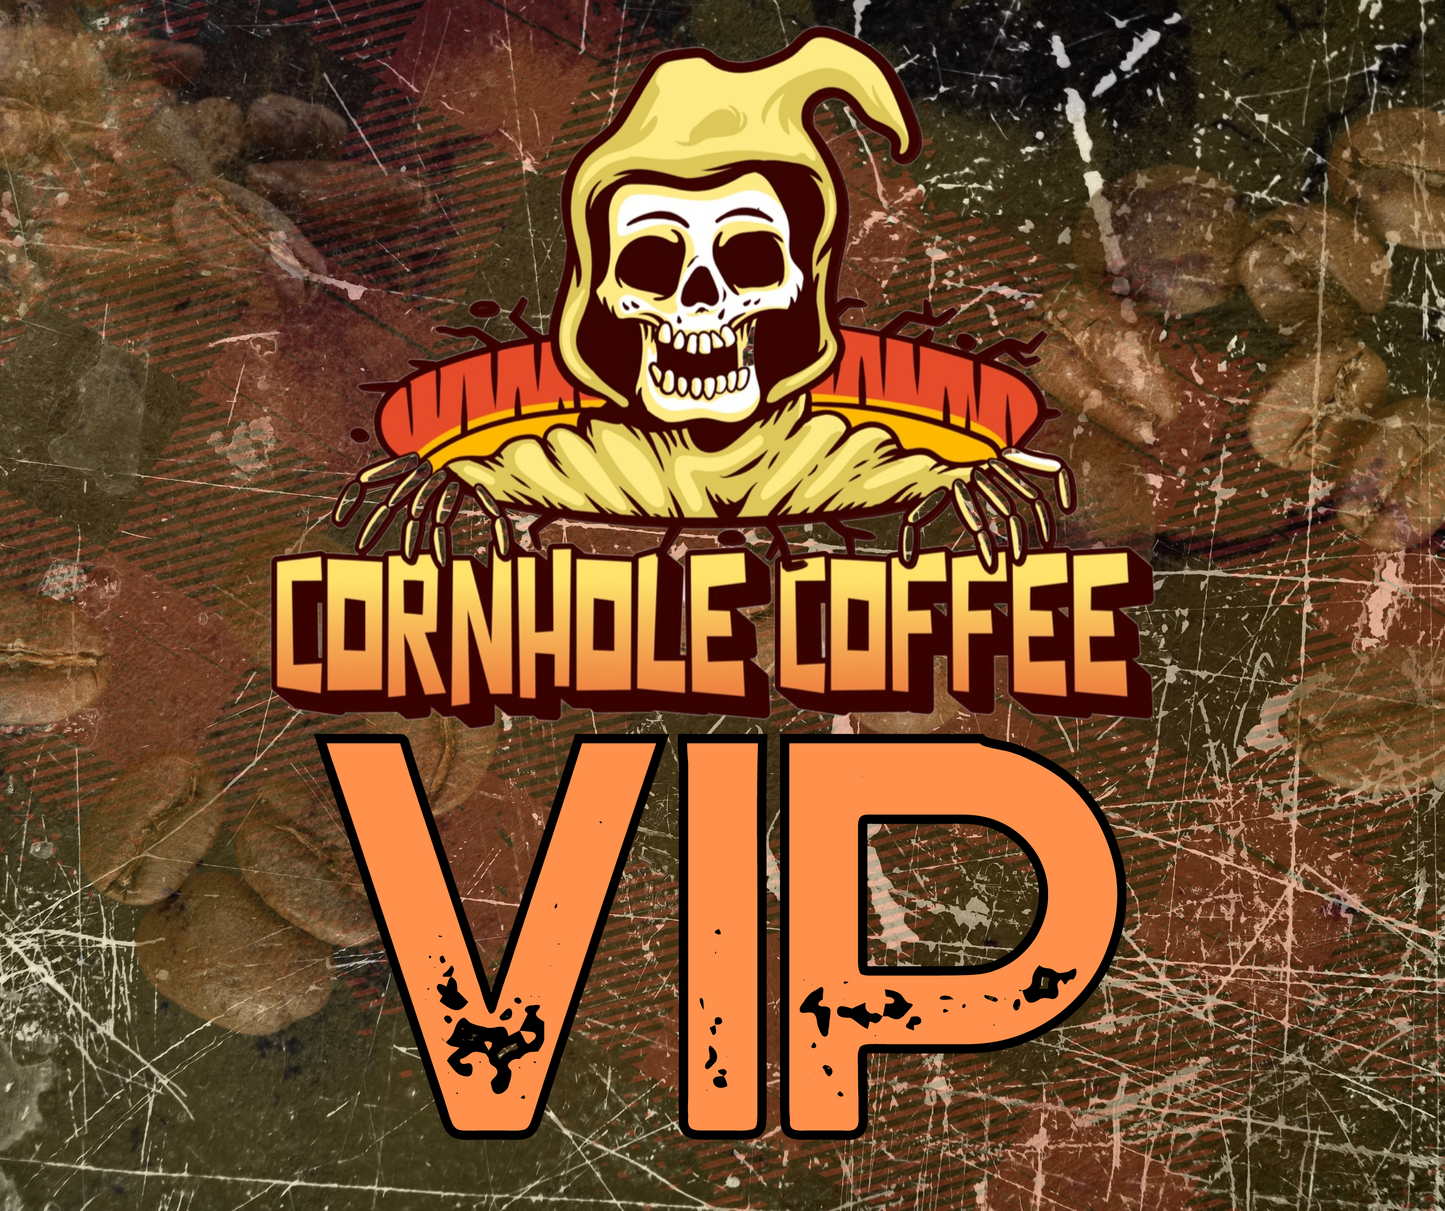 Cornhole Coffee VIP - Membership (BILLED MONTHLY $35 or YEARLY $370)